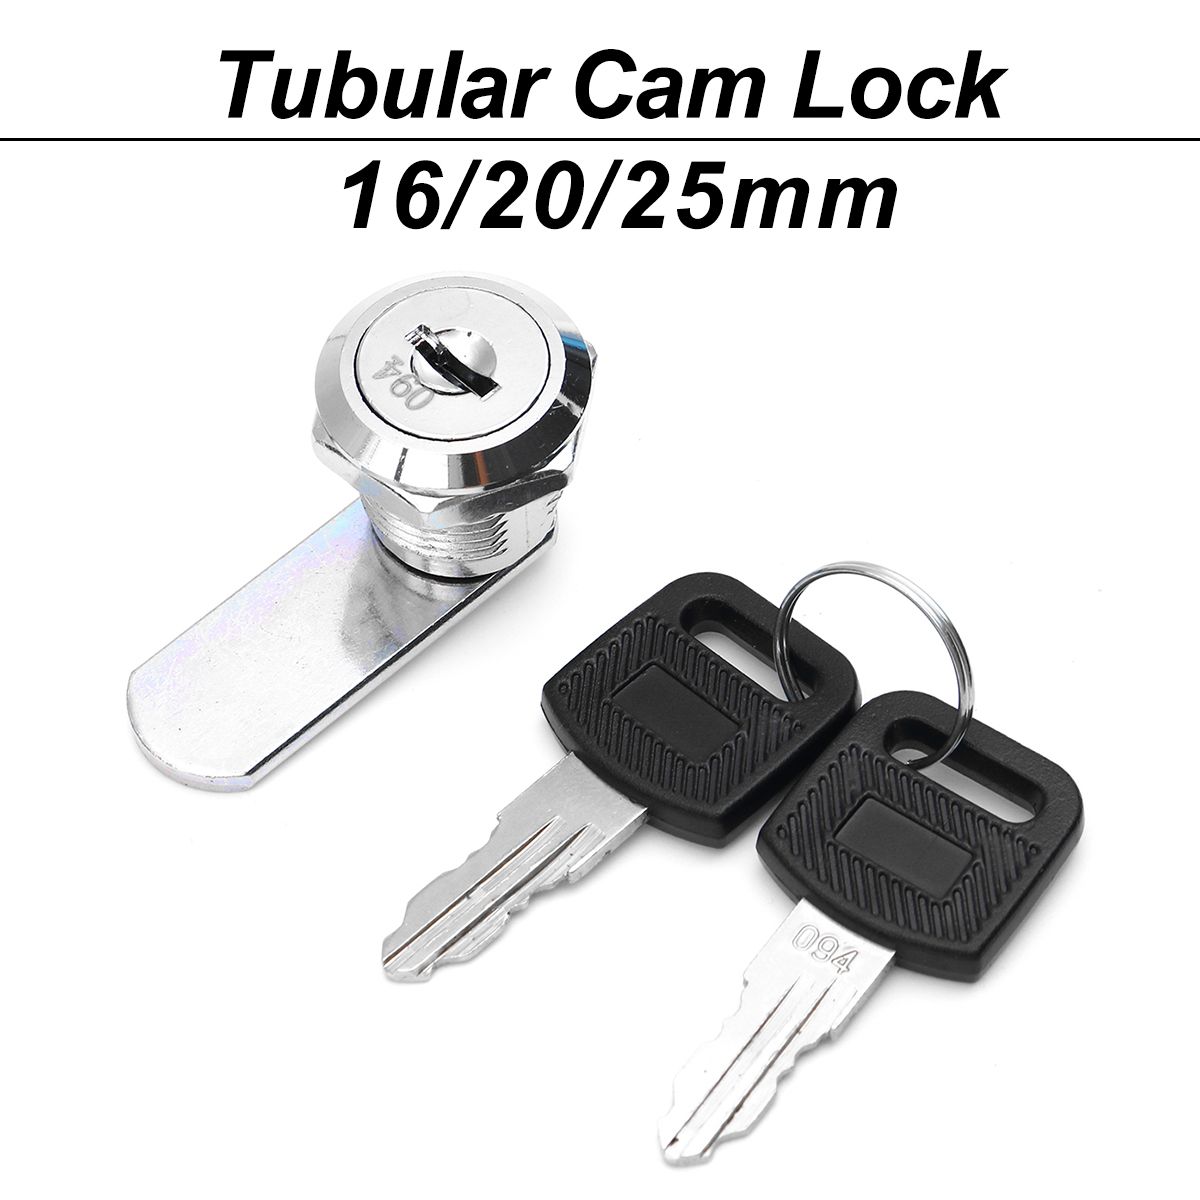 162025mm-Universal-Cam-Lock-for-Door-Cabinet-Mailbox-Drawer-Cupboard-with2-Keys-1702137